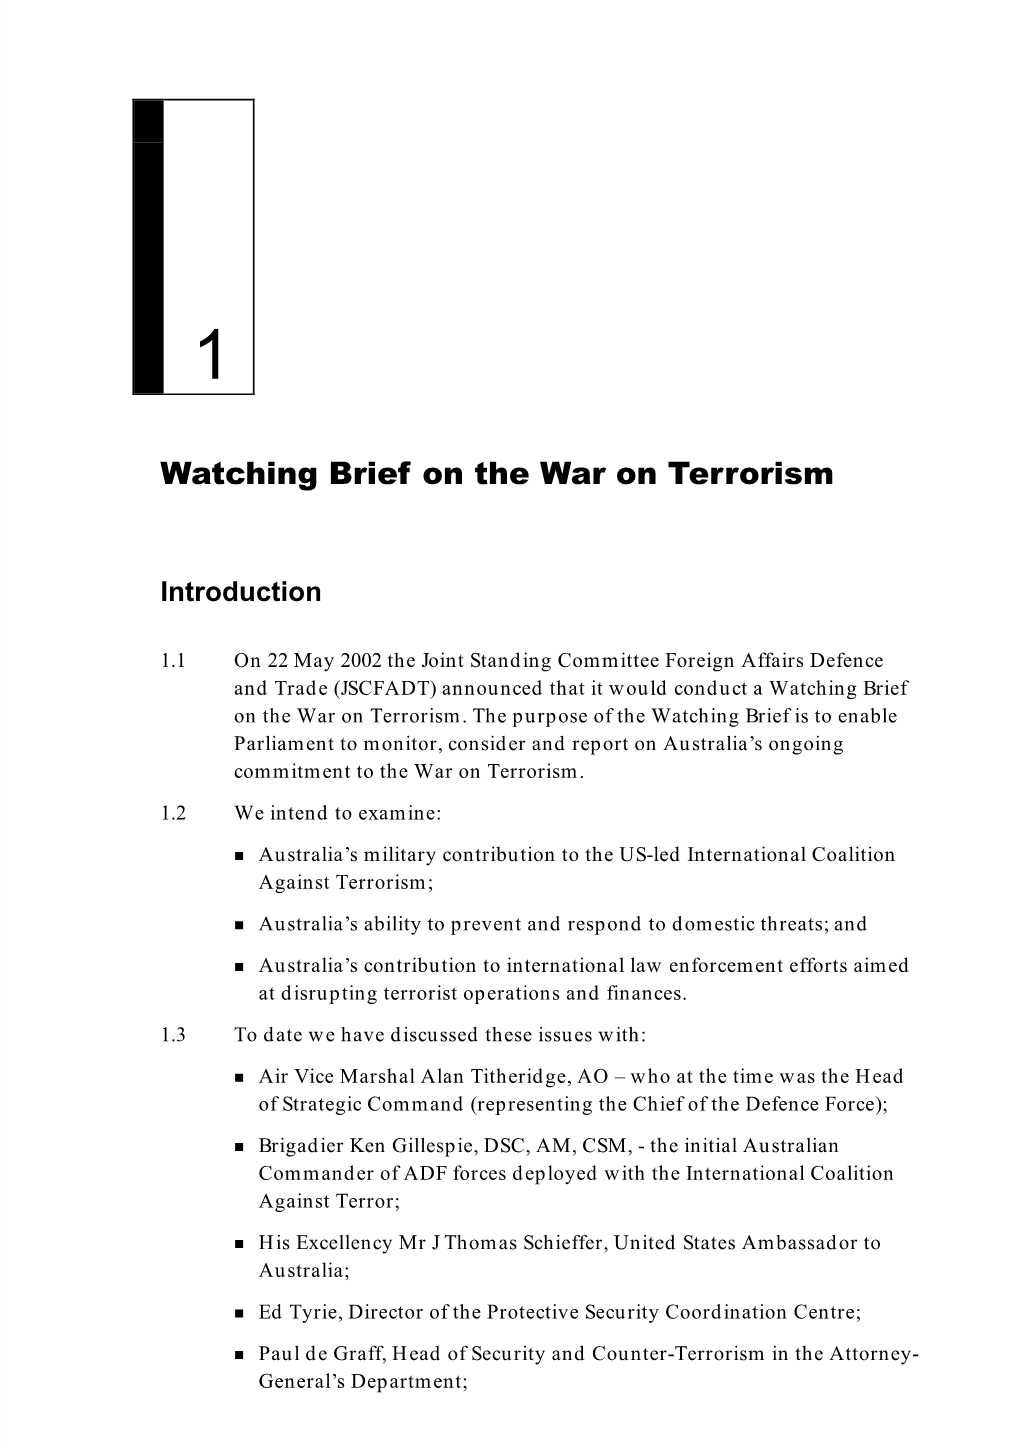 Chapter 1: Watching Brief on the War on Terrorism